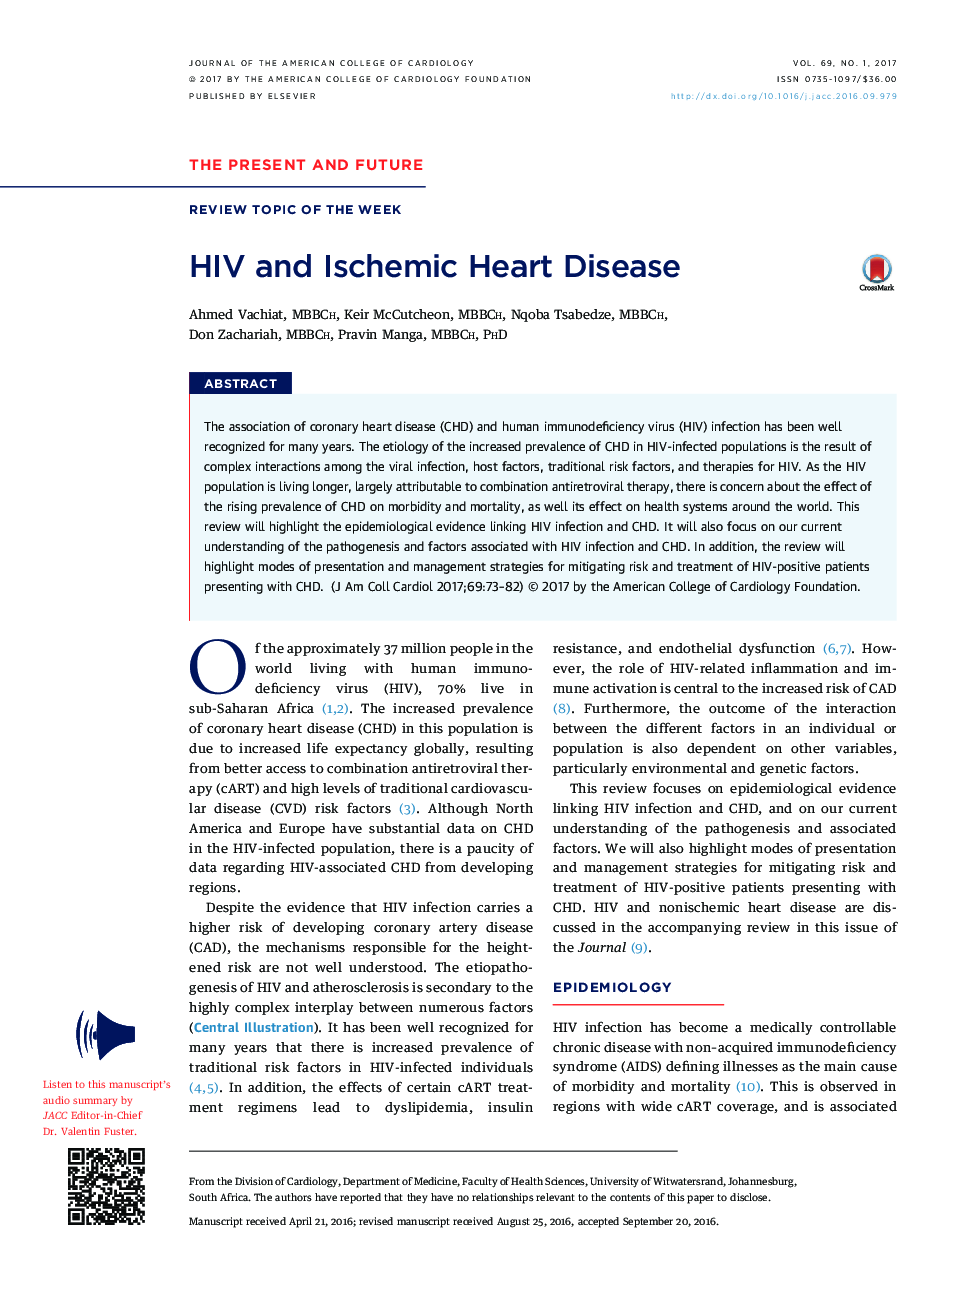 HIV and Ischemic Heart Disease